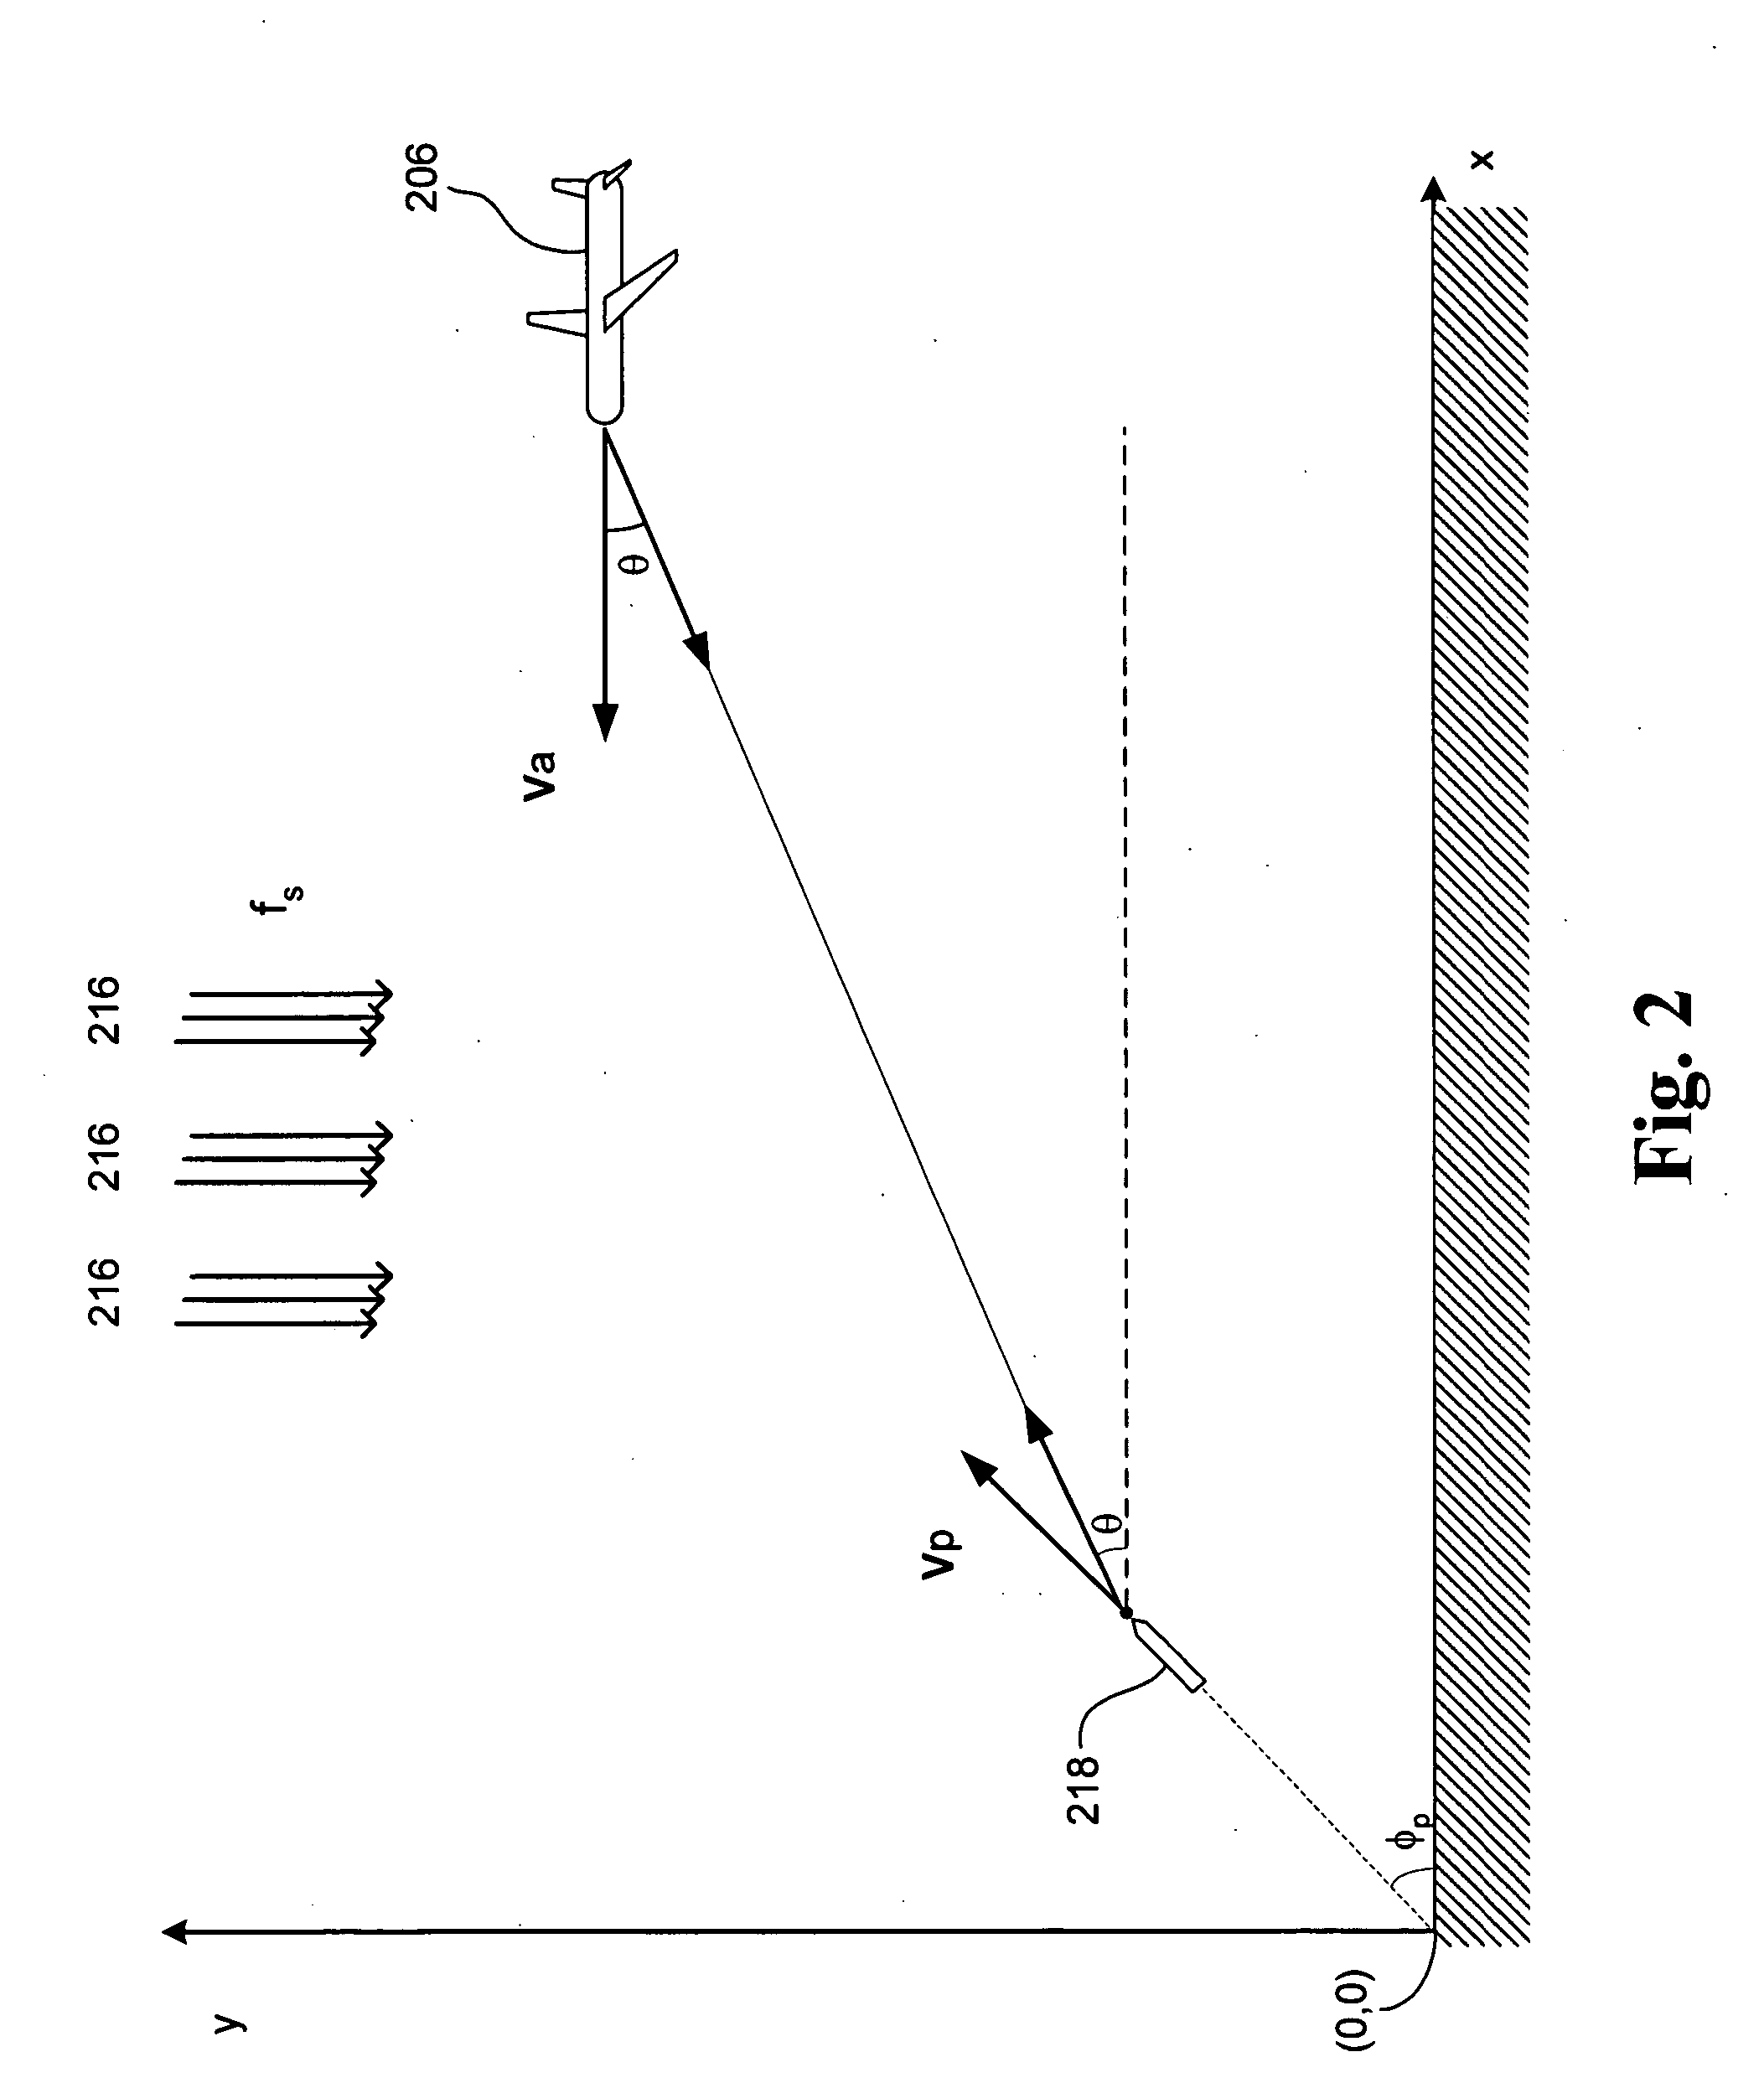 System and method for onboard detection of ballistic threats to aircraft